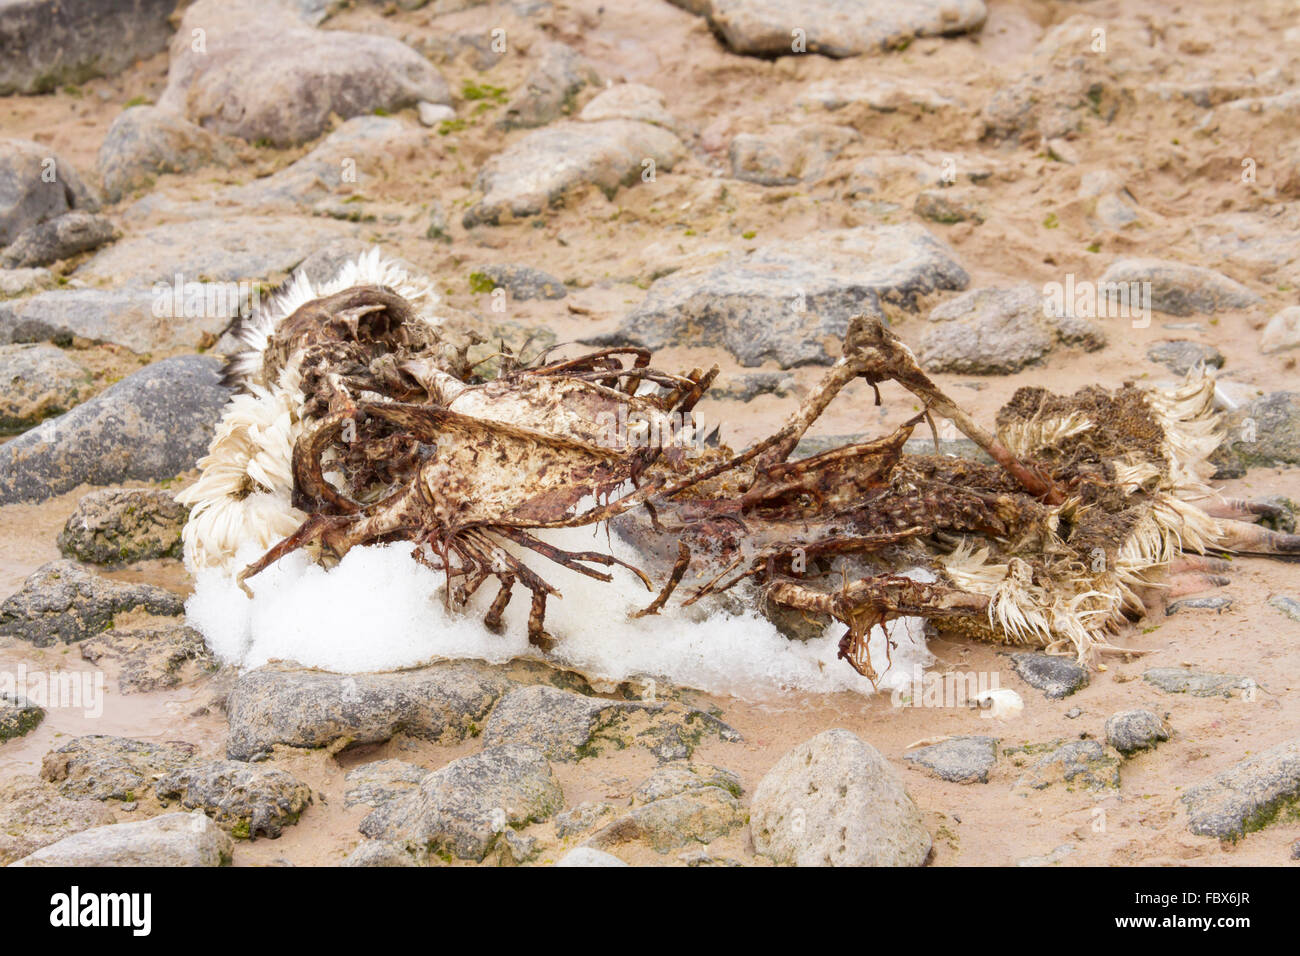 Skeleton of adelie penguin on Paulet Island, Antarctica with remains of winter snow. Stock Photo